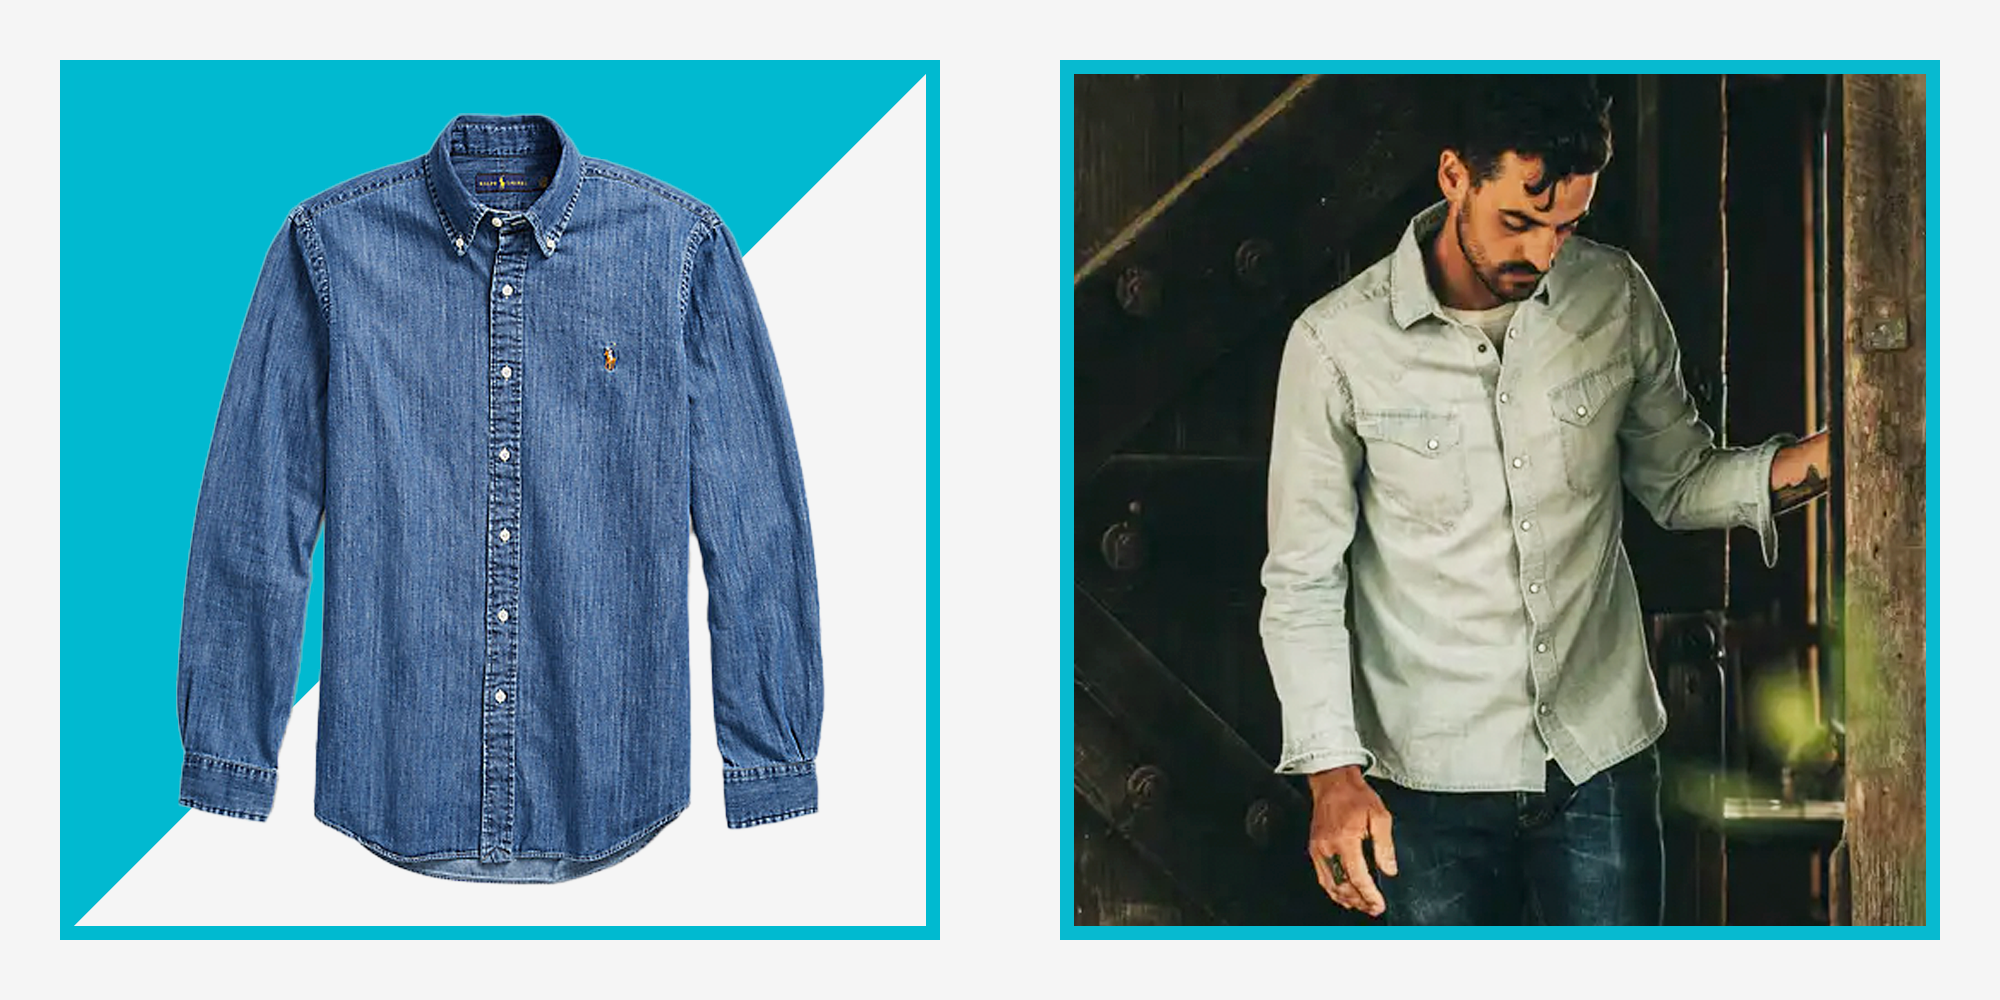 ask send Rub The 30 Best Men's Denim Shirts to Buy in 2022, According to a Style Expert